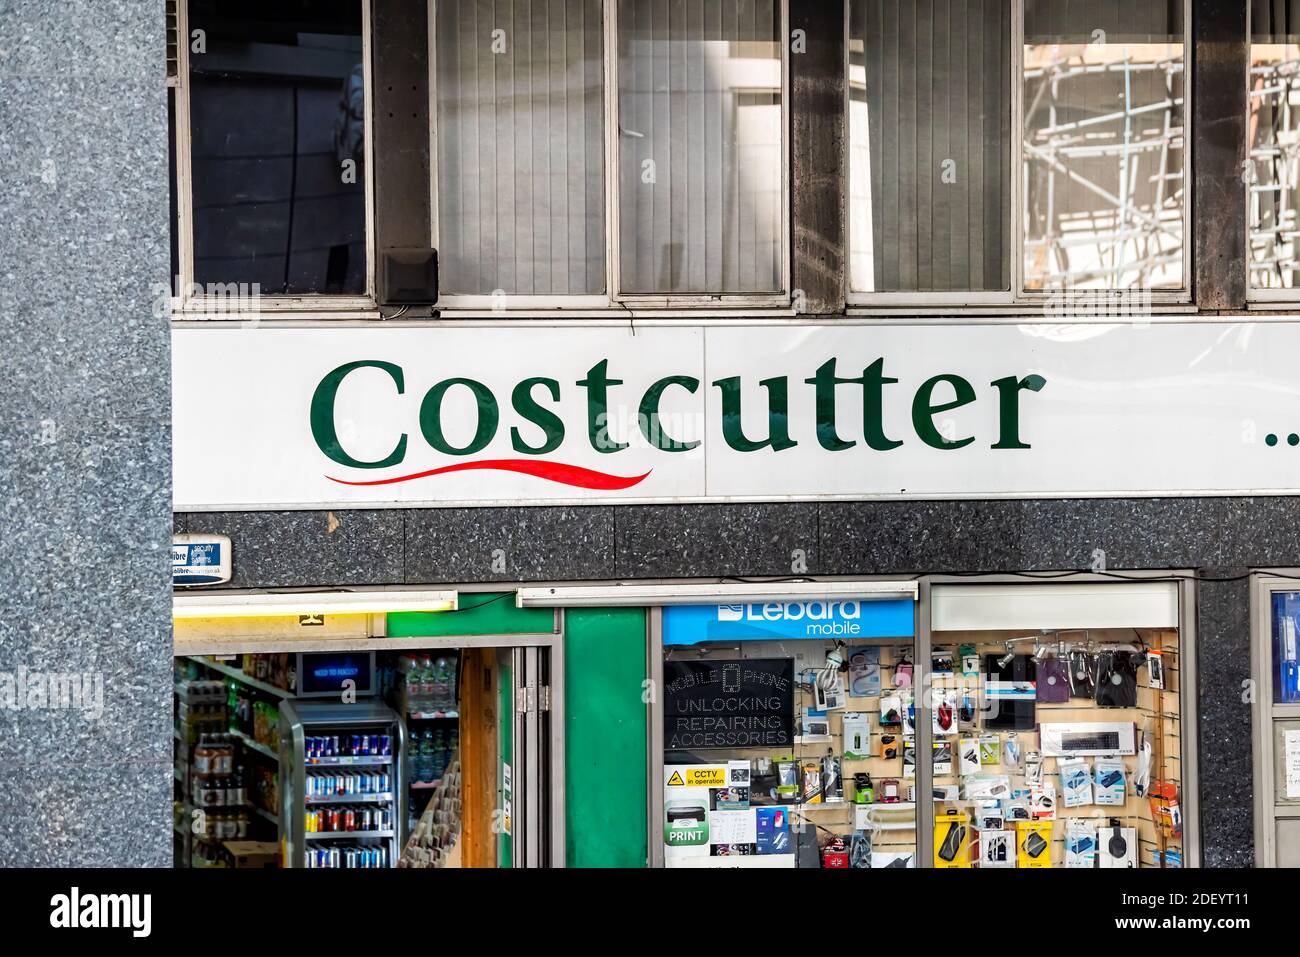 London, UK - June 22, 2018: Neighborhood local store Costcutter grocery shopping storefront facade exterior entrance with sign and entrance Stock Photo